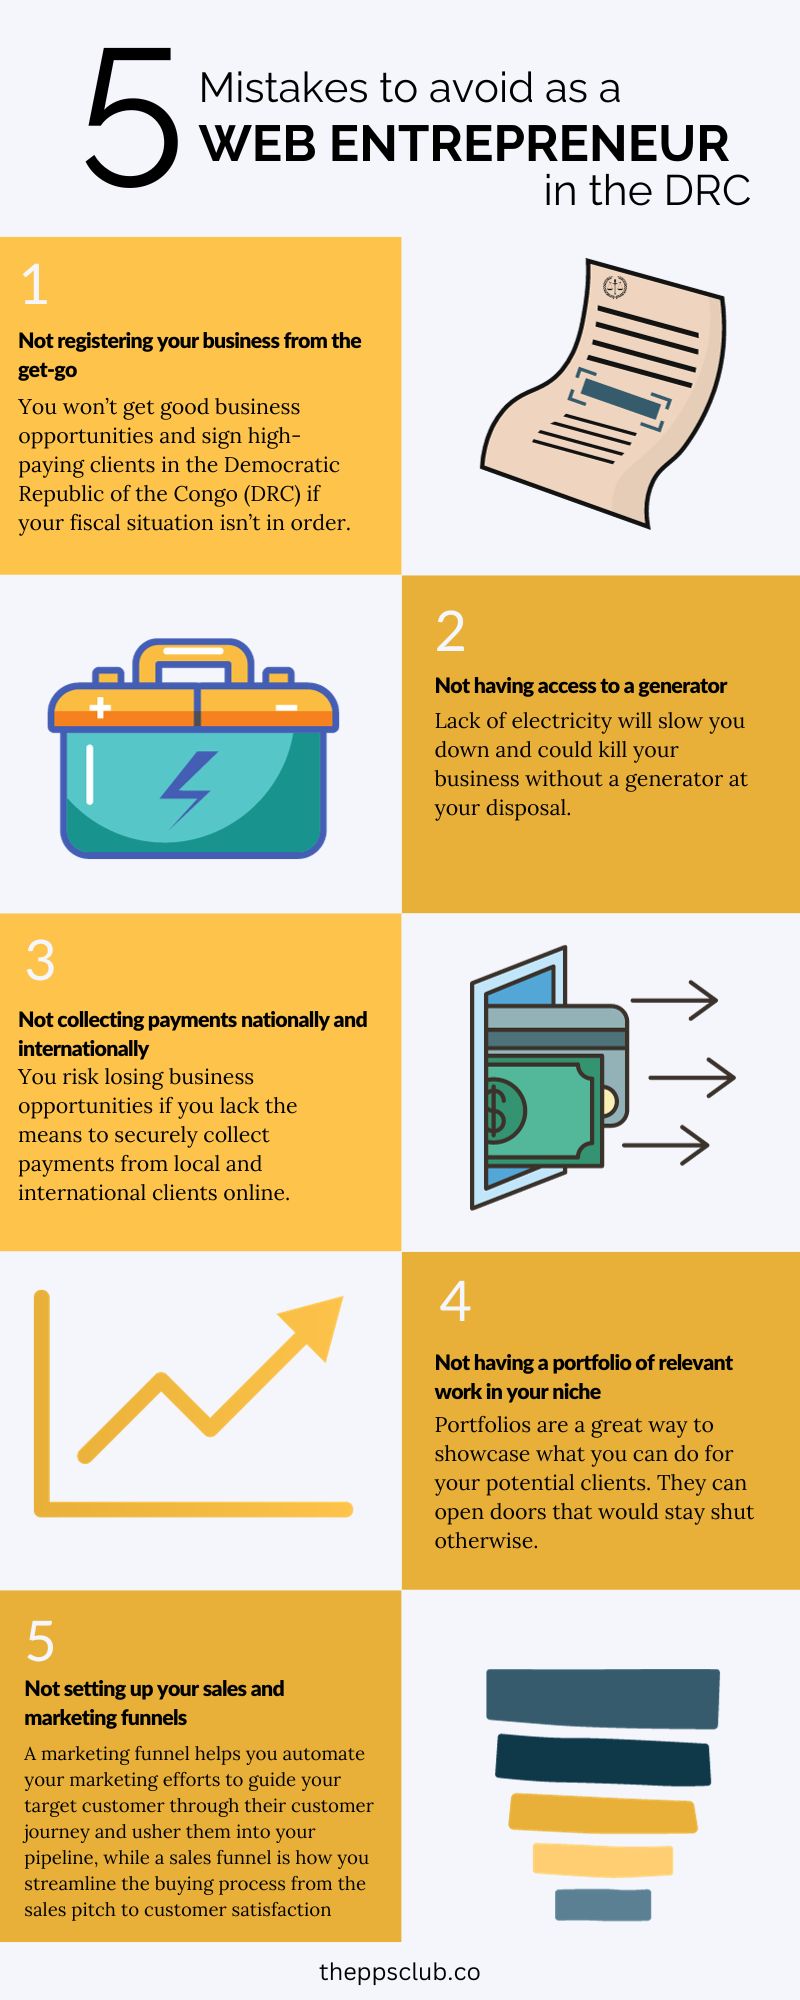 Infographic summarizing the 5 mistakes to avoid when starting as a web entrepreneur in the DRC